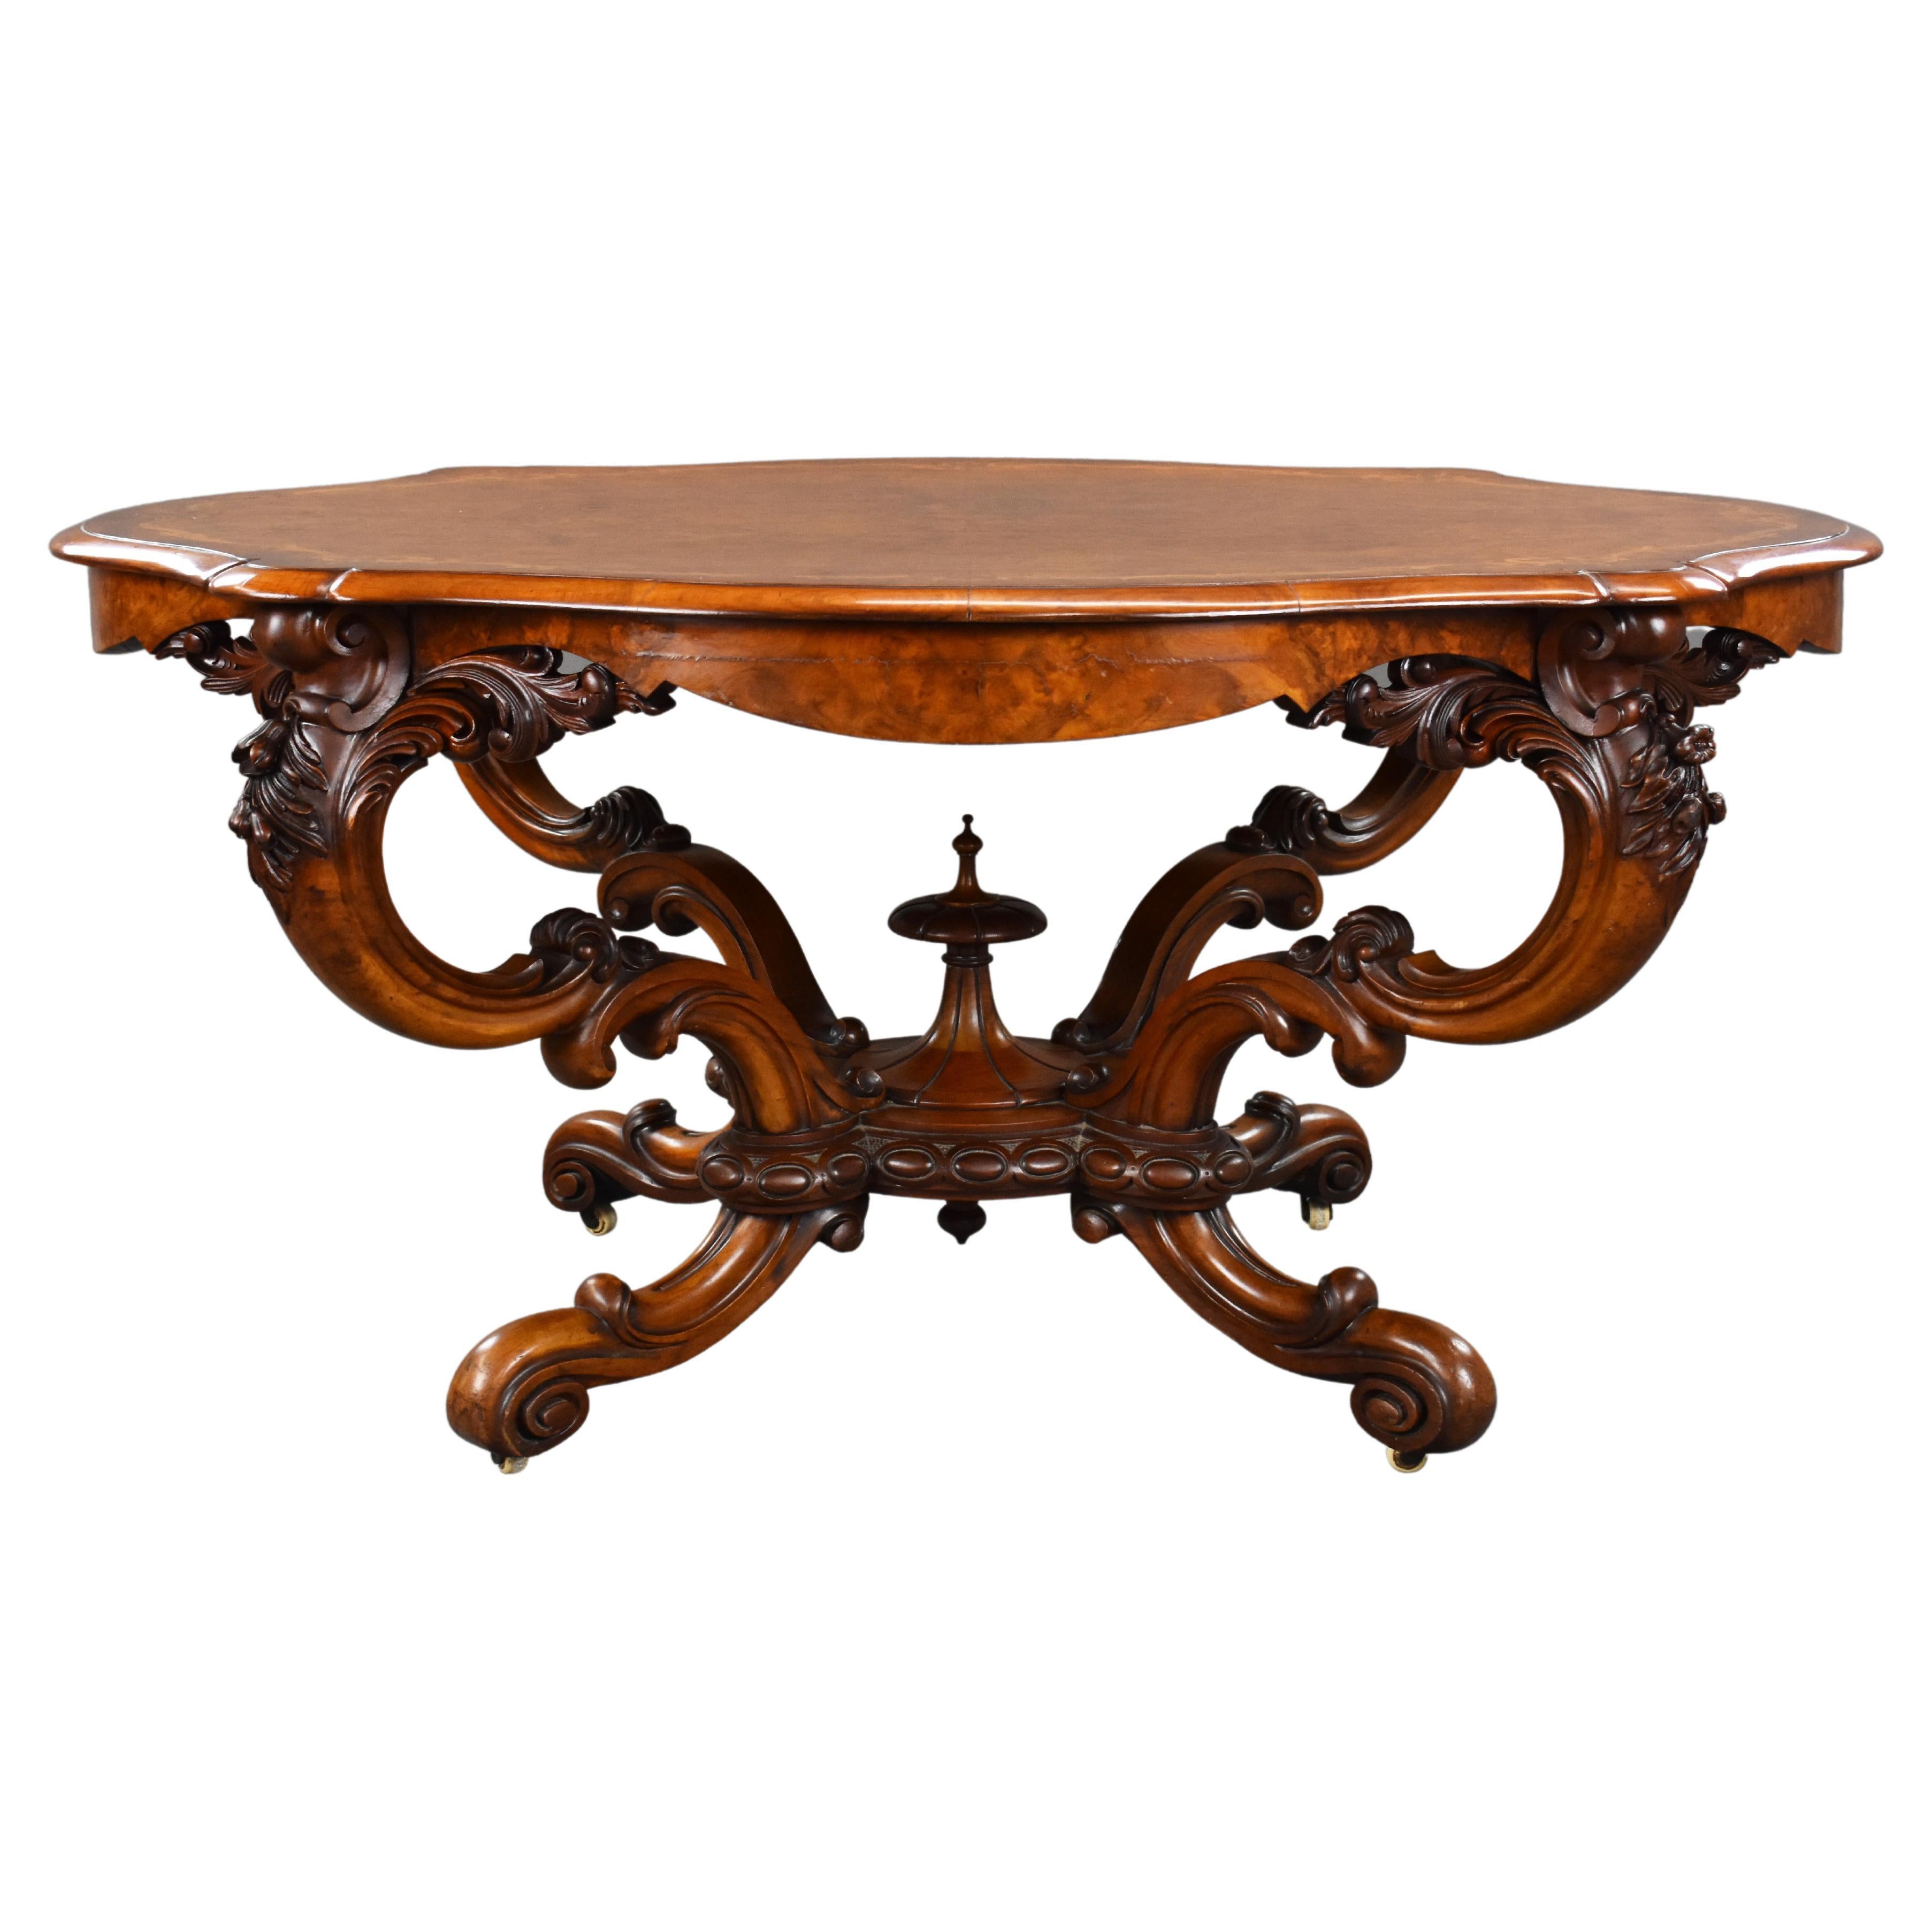 19th Century English Victorian Burr Walnut and Marquetry Center Table